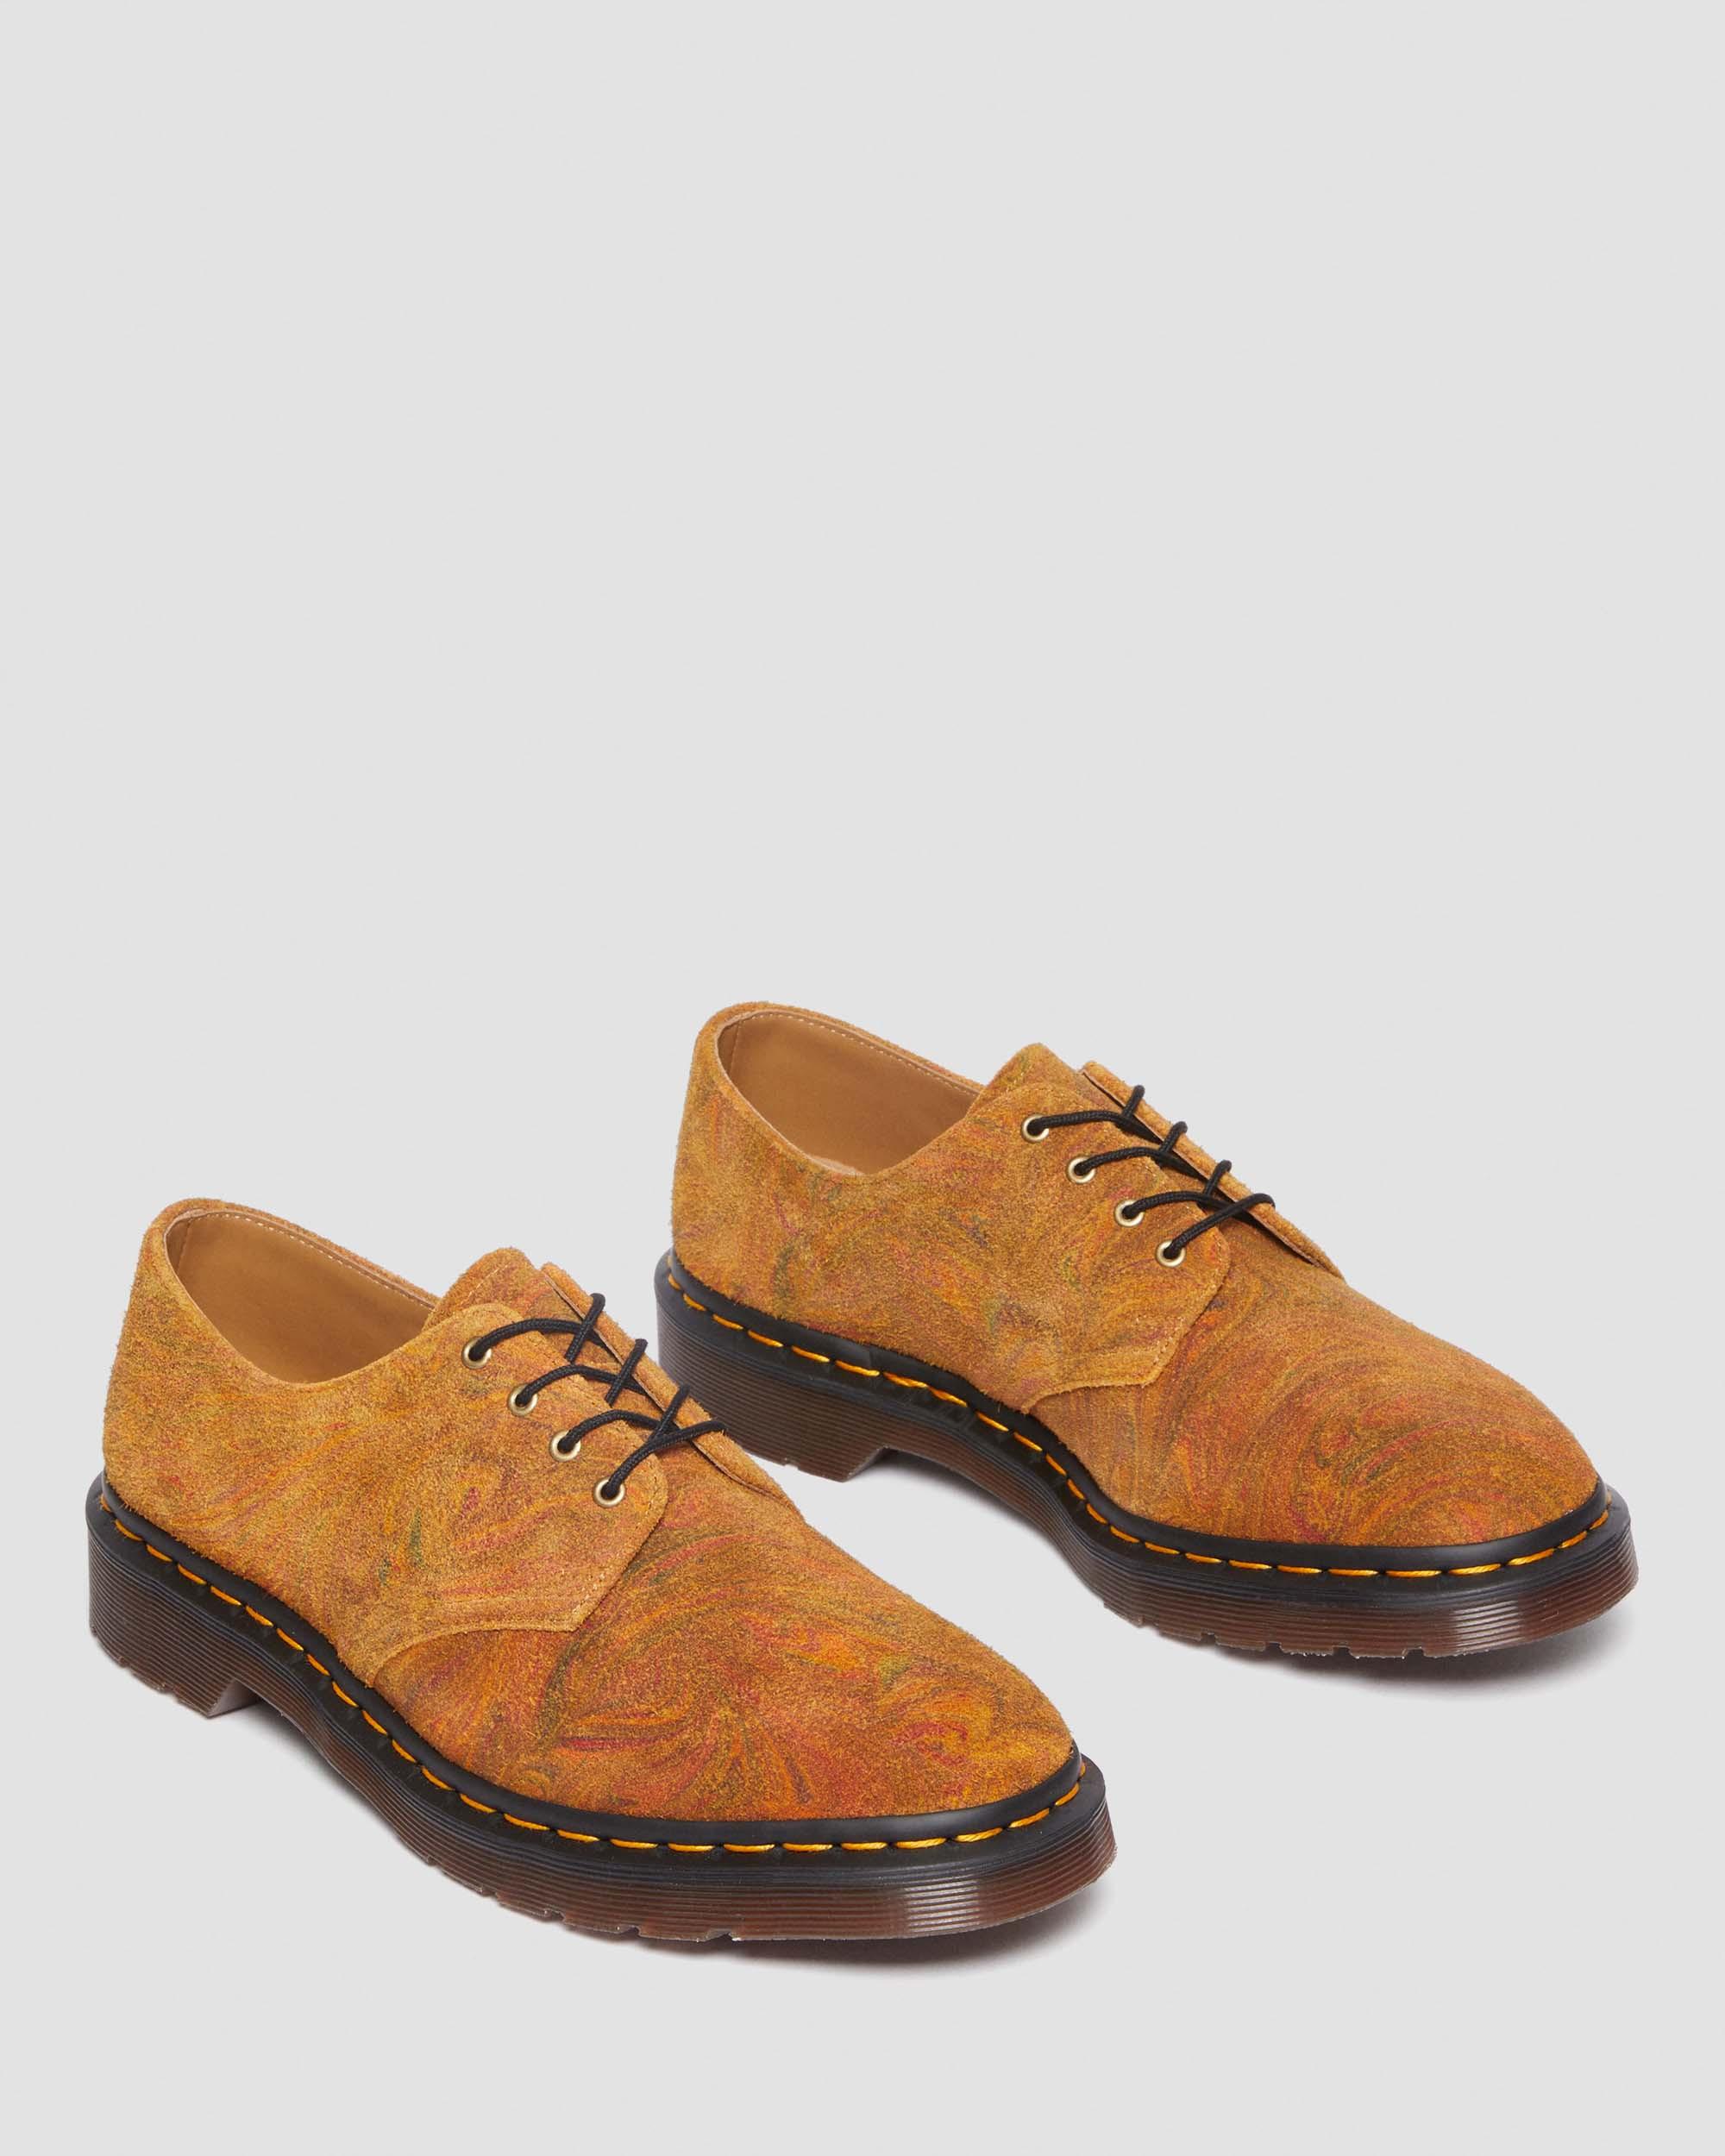 Smiths Marbled Hairy Suede Shoes